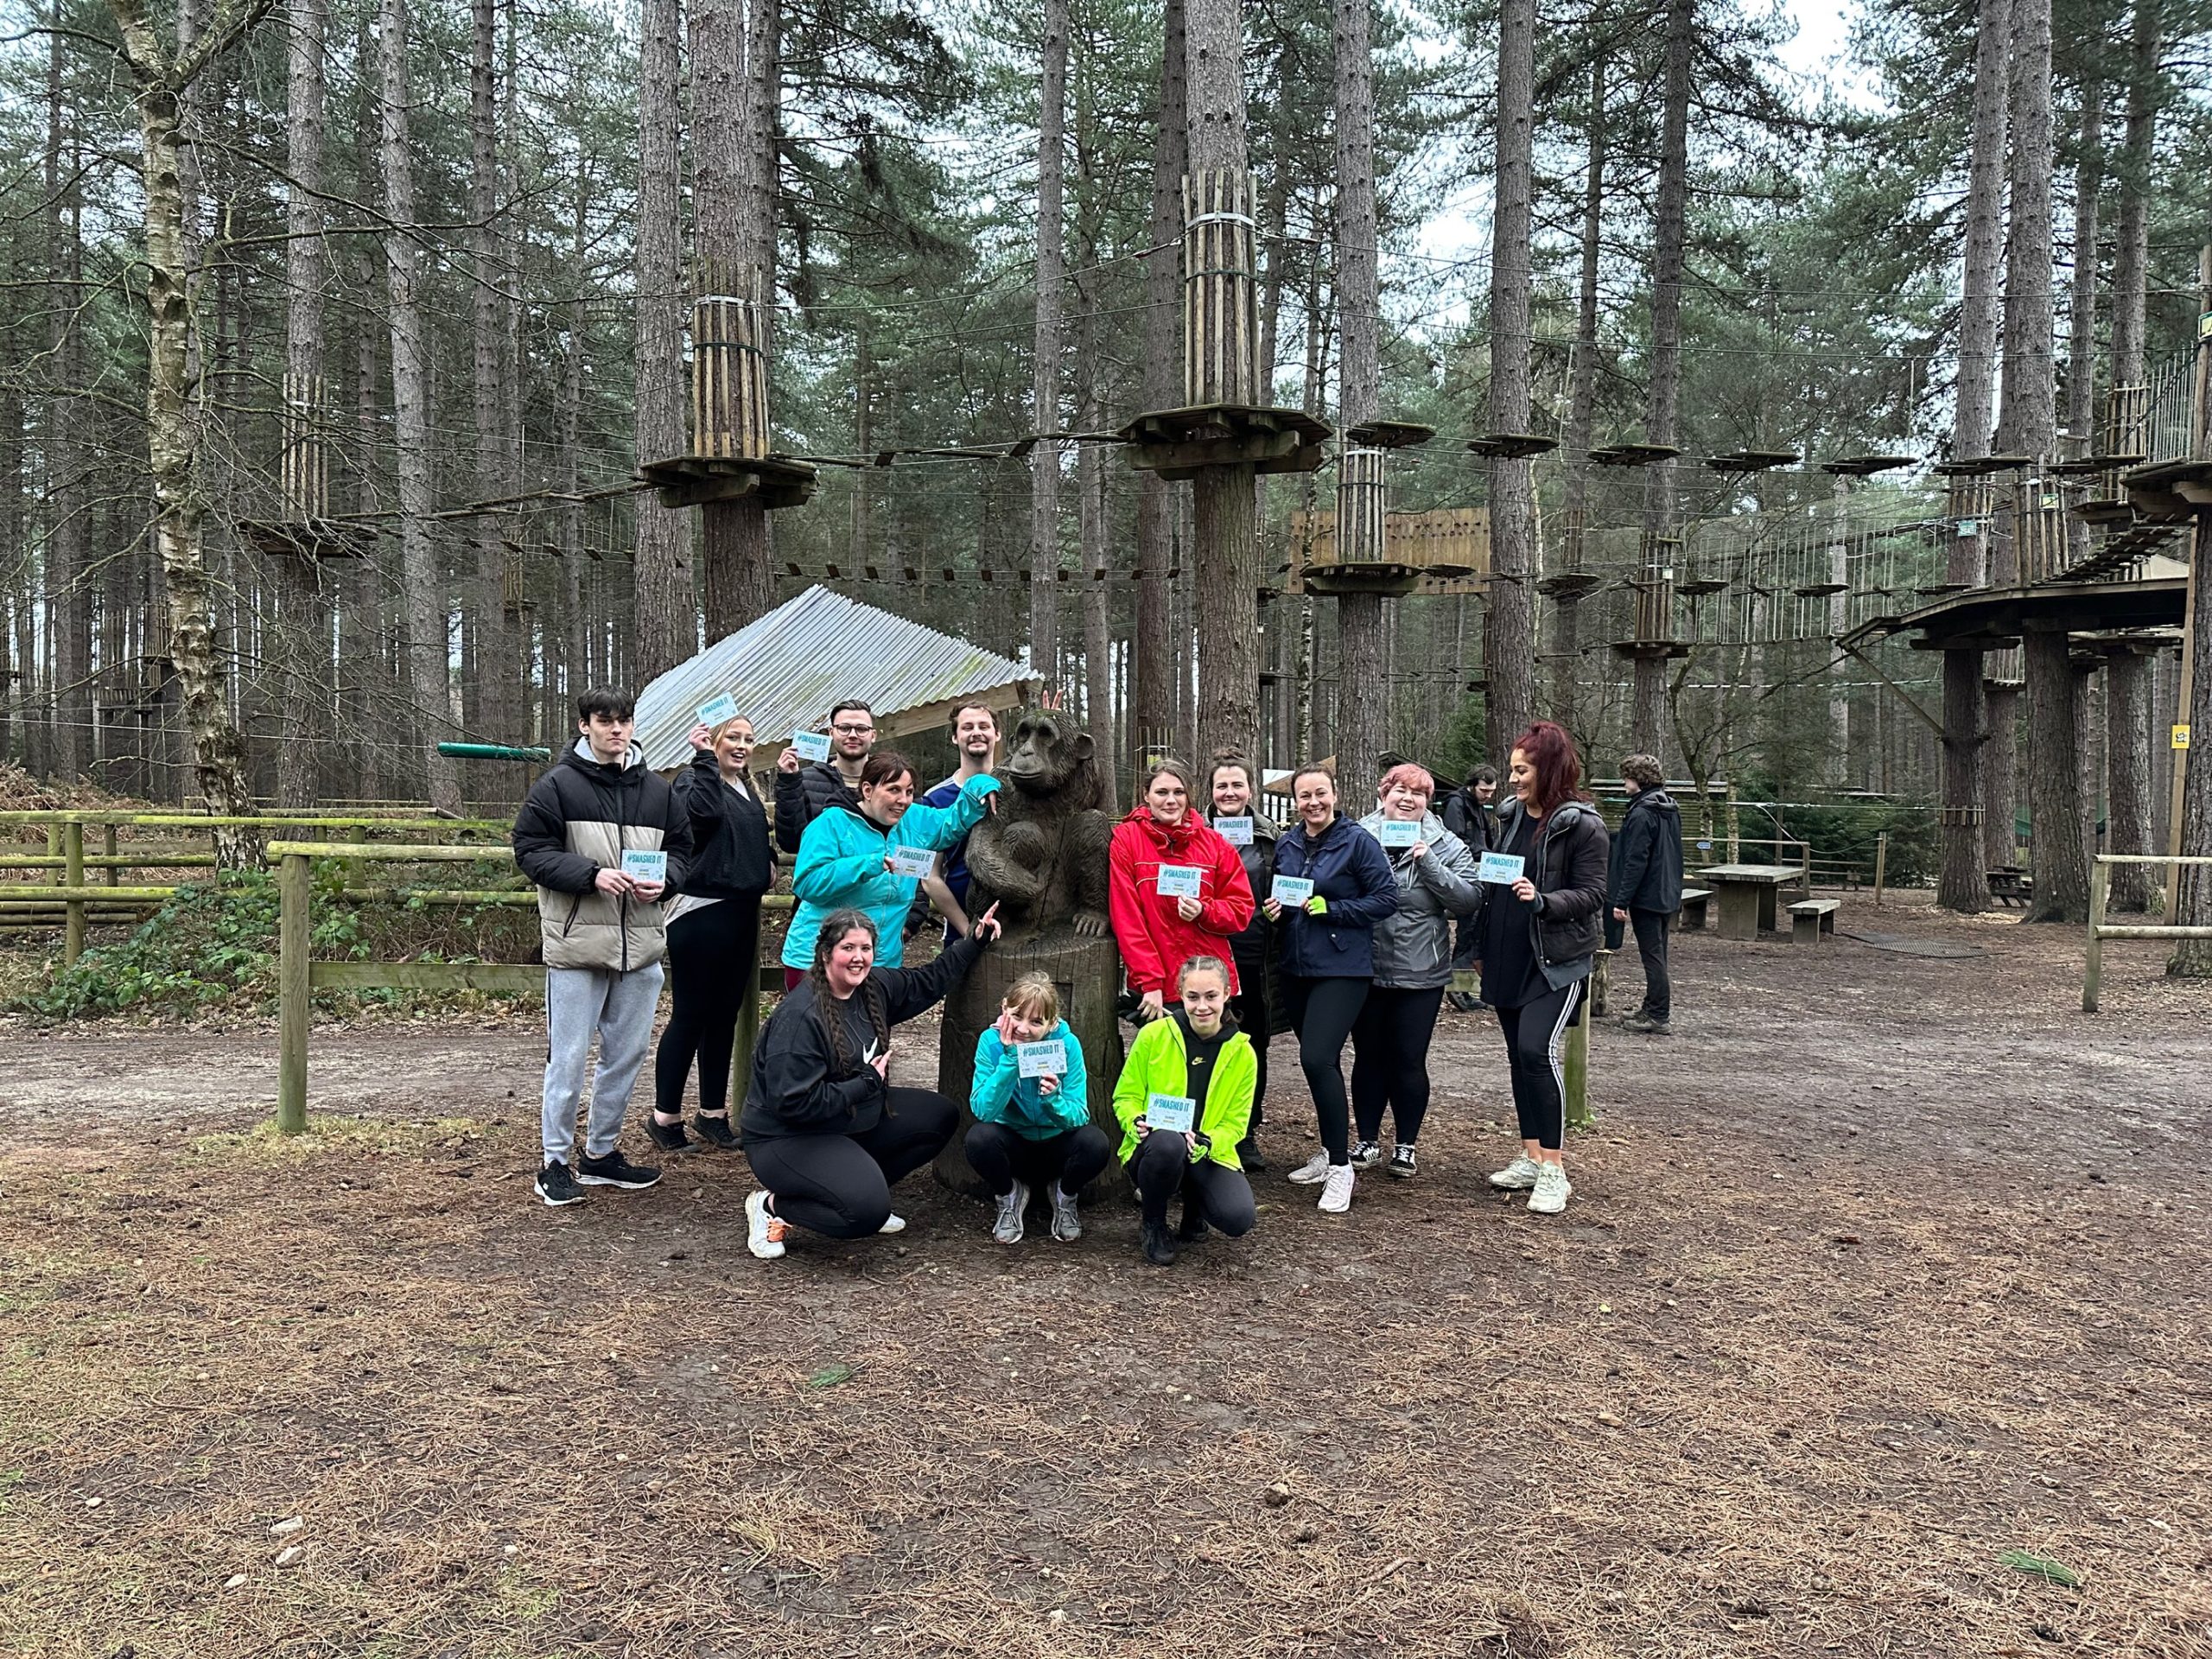 Our Team Away Day at Go Ape!